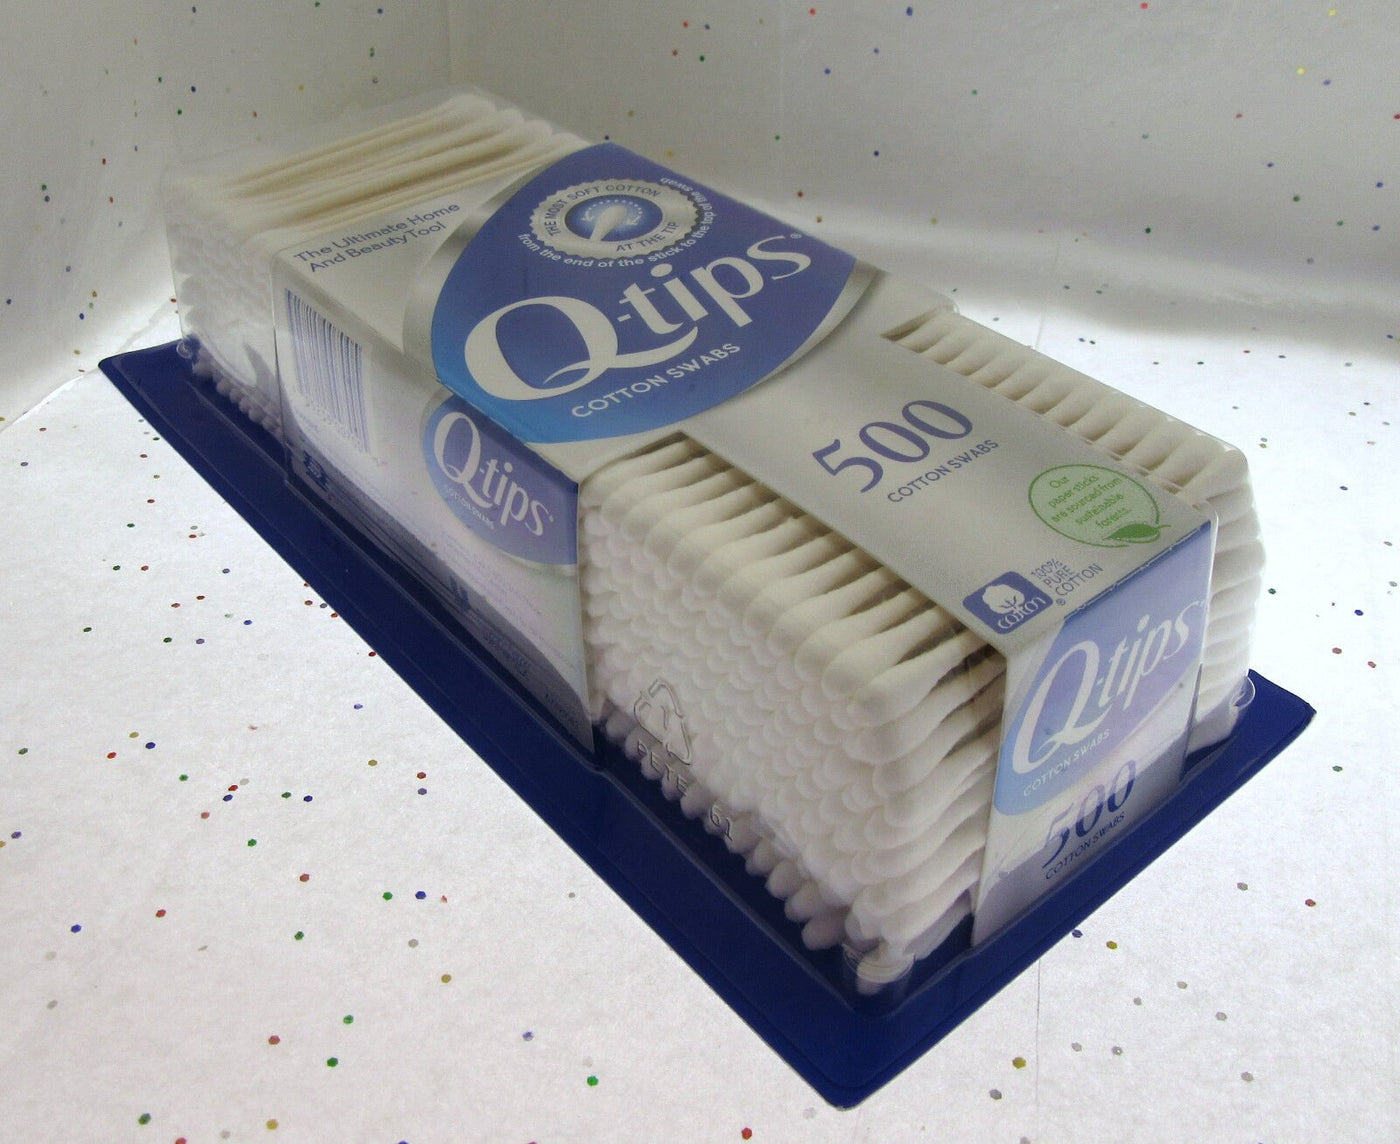 Q-tips 500 Count Cotton Swabs Brand NEW Sealed Sterile Ears